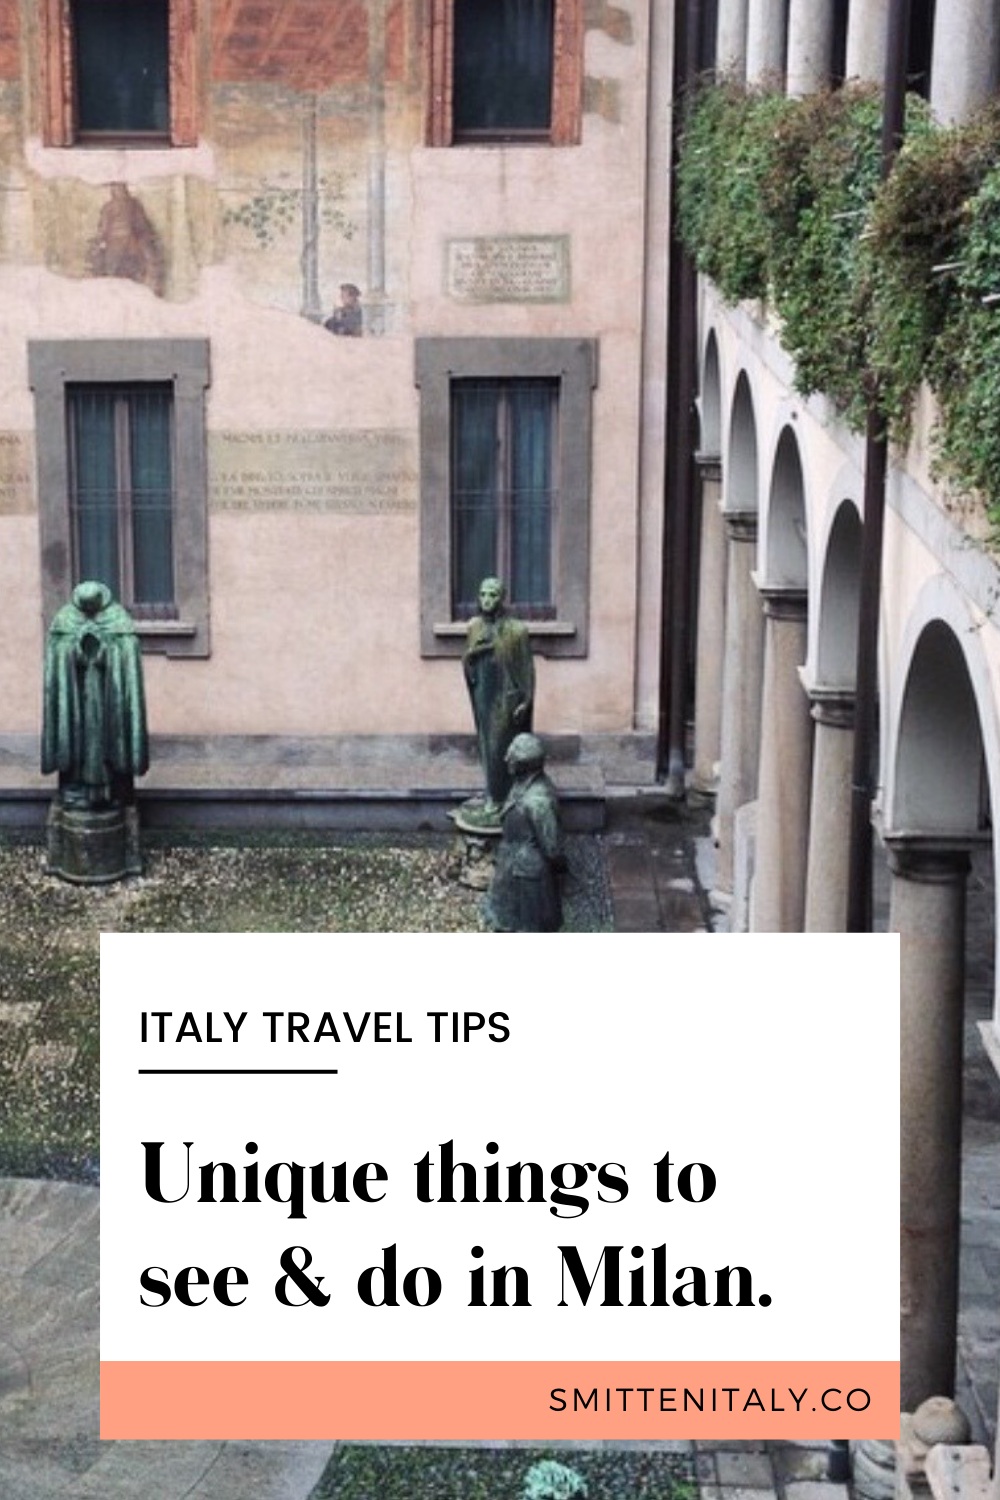 Beyond the Duomo: 5 unique things to see in Milan. 3